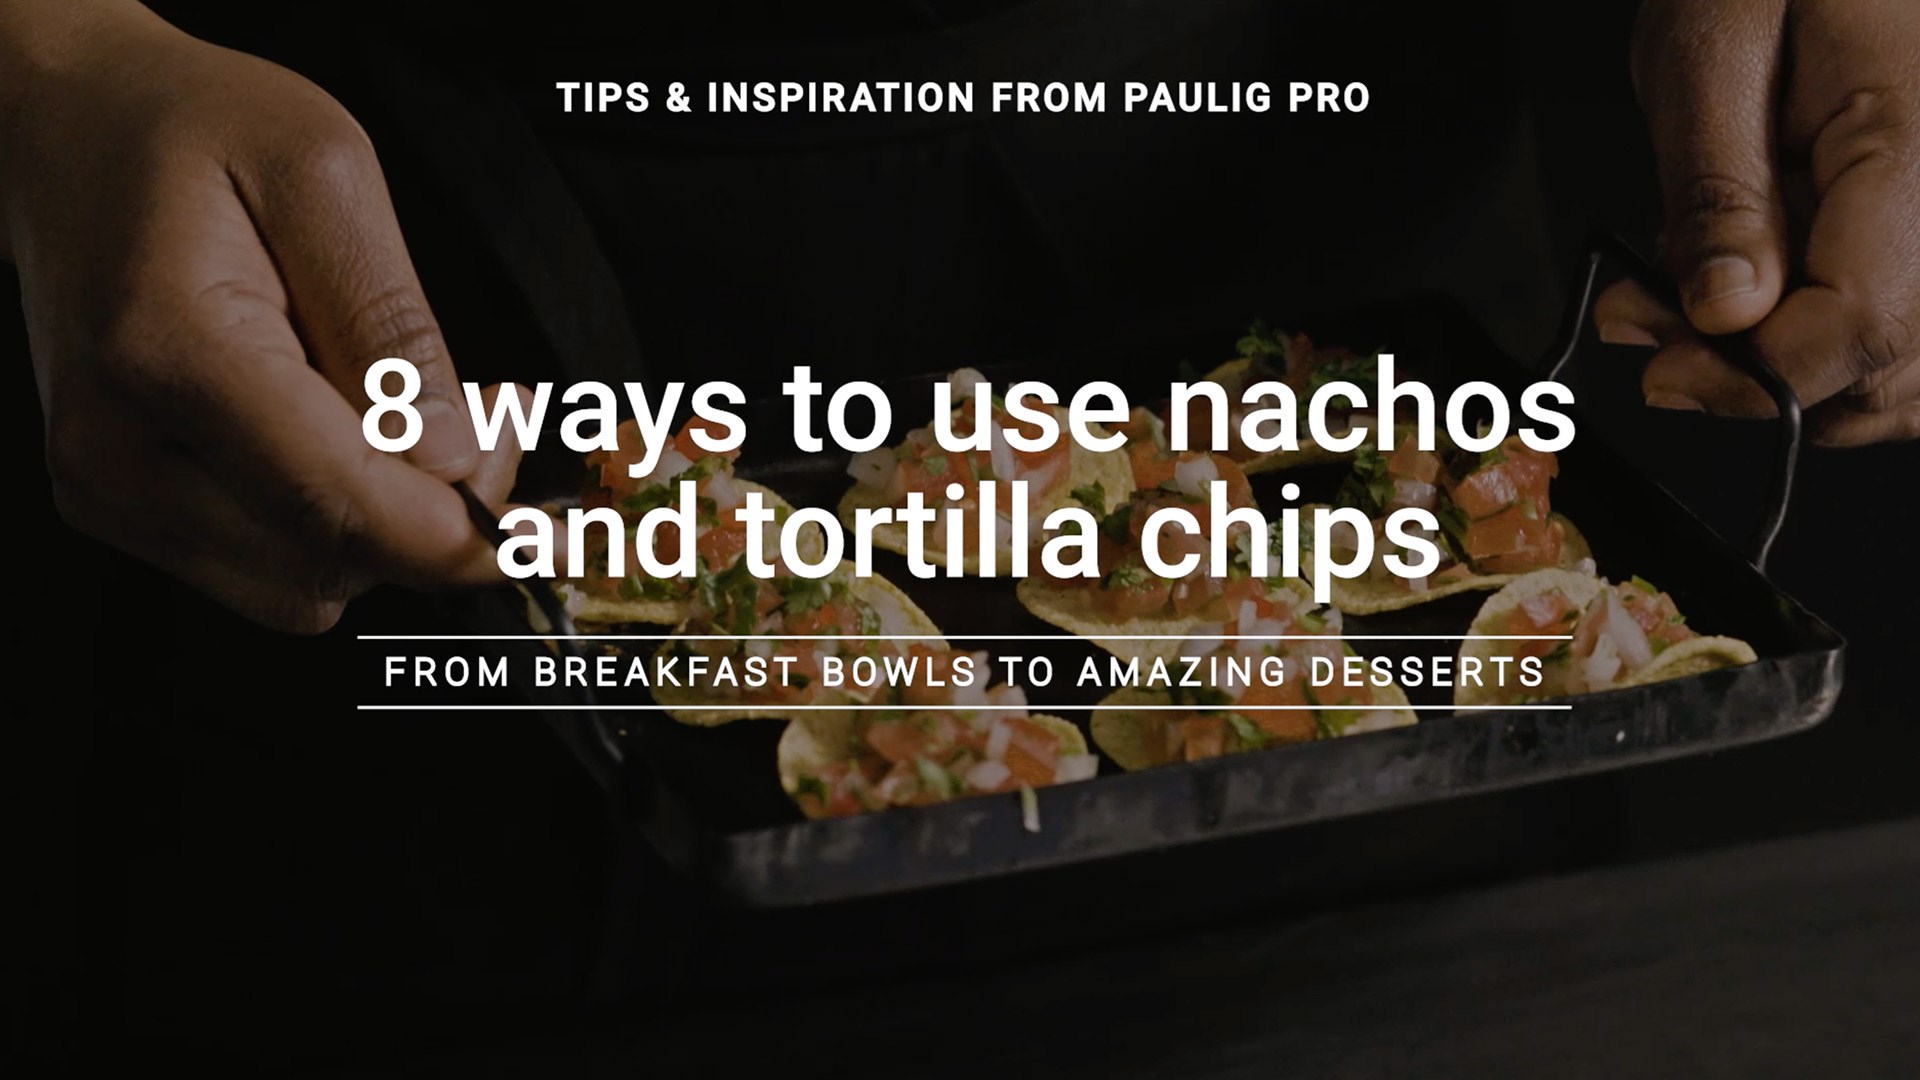 8 ways to use nachos and tortilla chips